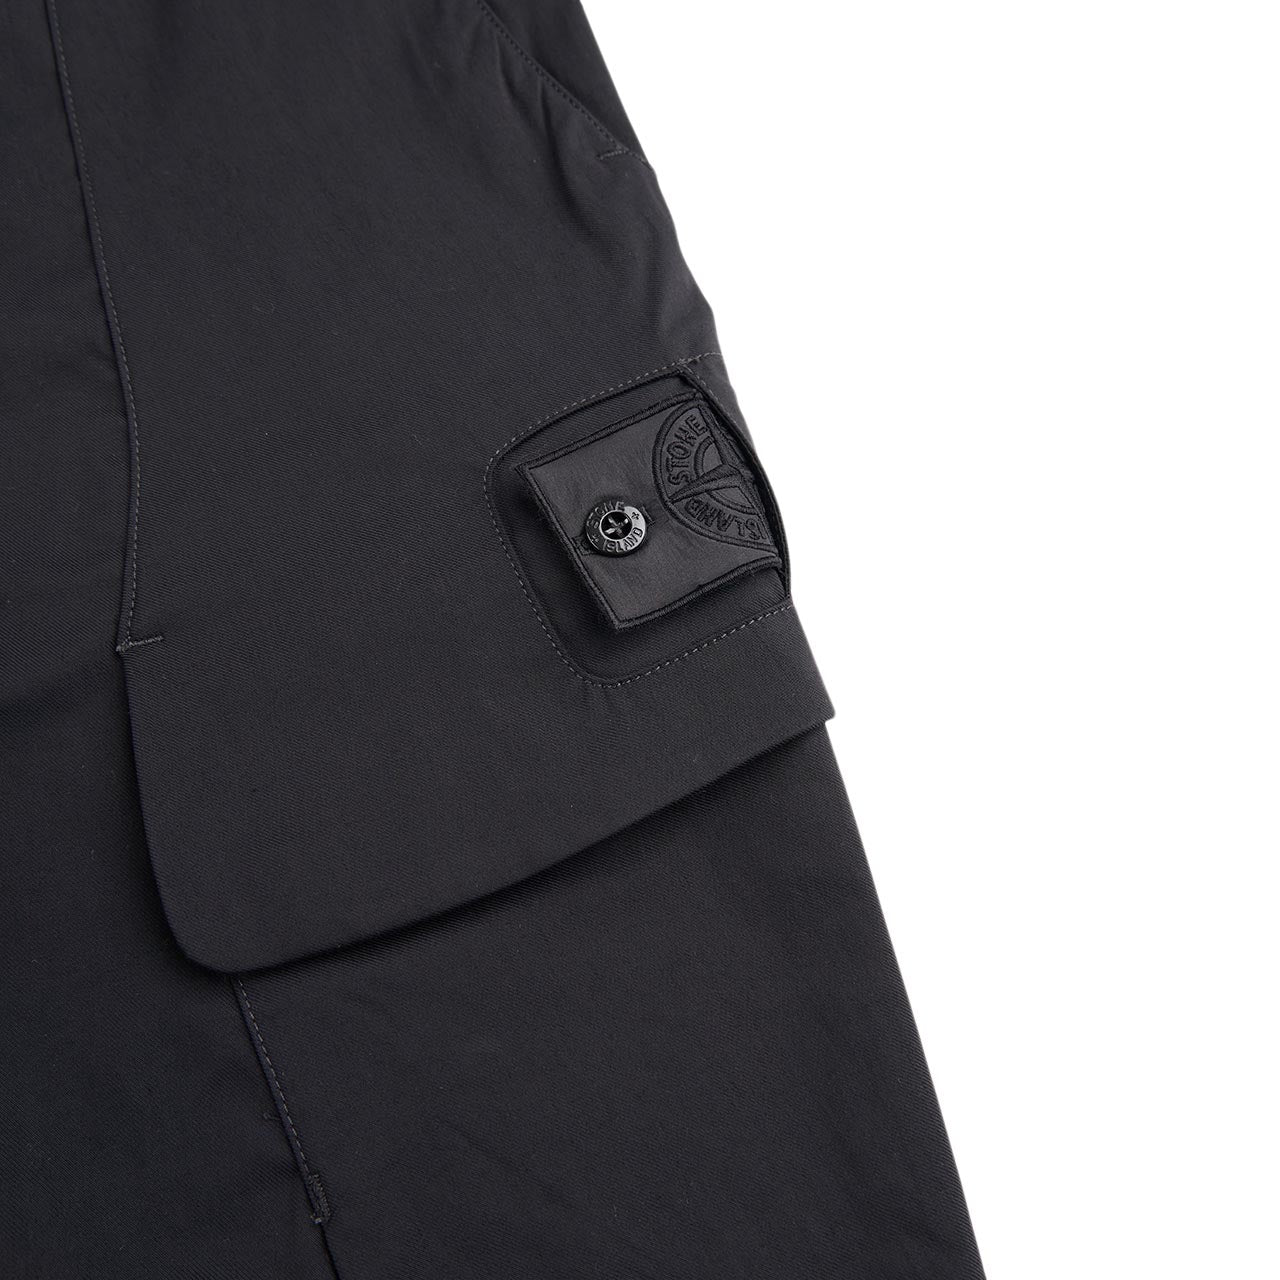 stone island shadow project tapered cargo pants (black)